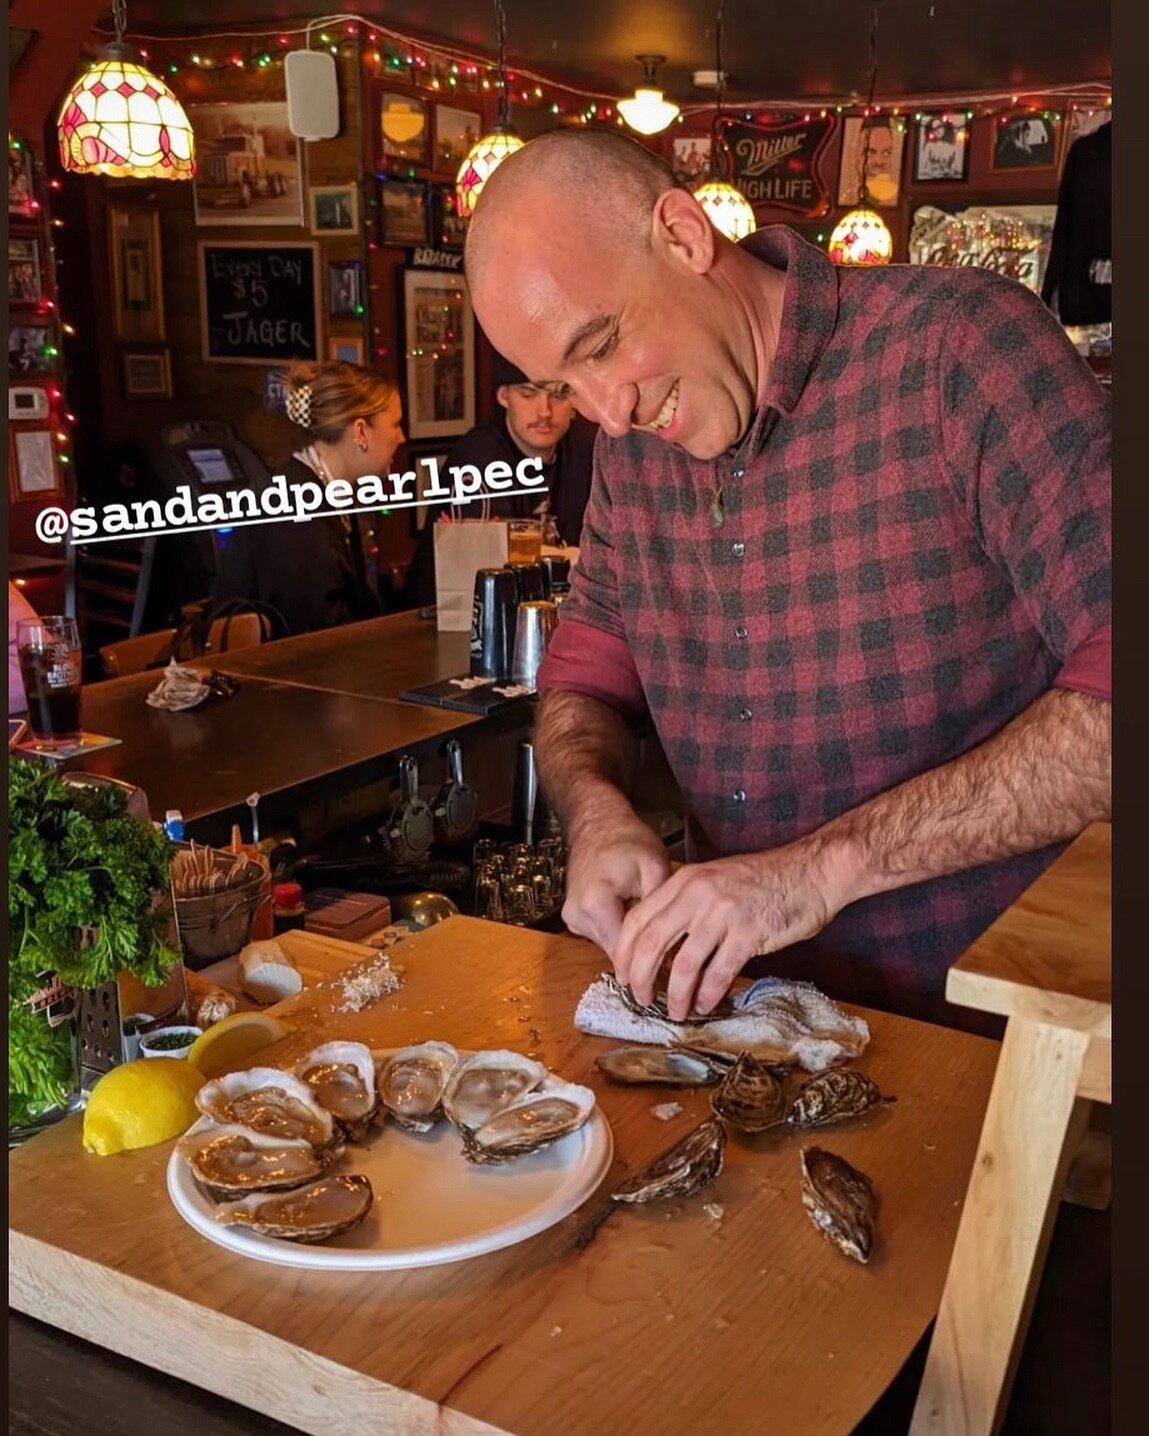 Nate shucking at the bar @lloydsonqueen 
Thanks for having us at your bar 🦞 🦪💙

We had a blast 💥 
Sea ya L8R 

#toronto #oysters #cocktails #beers #saturdaynight #bar #torontobars #lobsterroll #howweroll